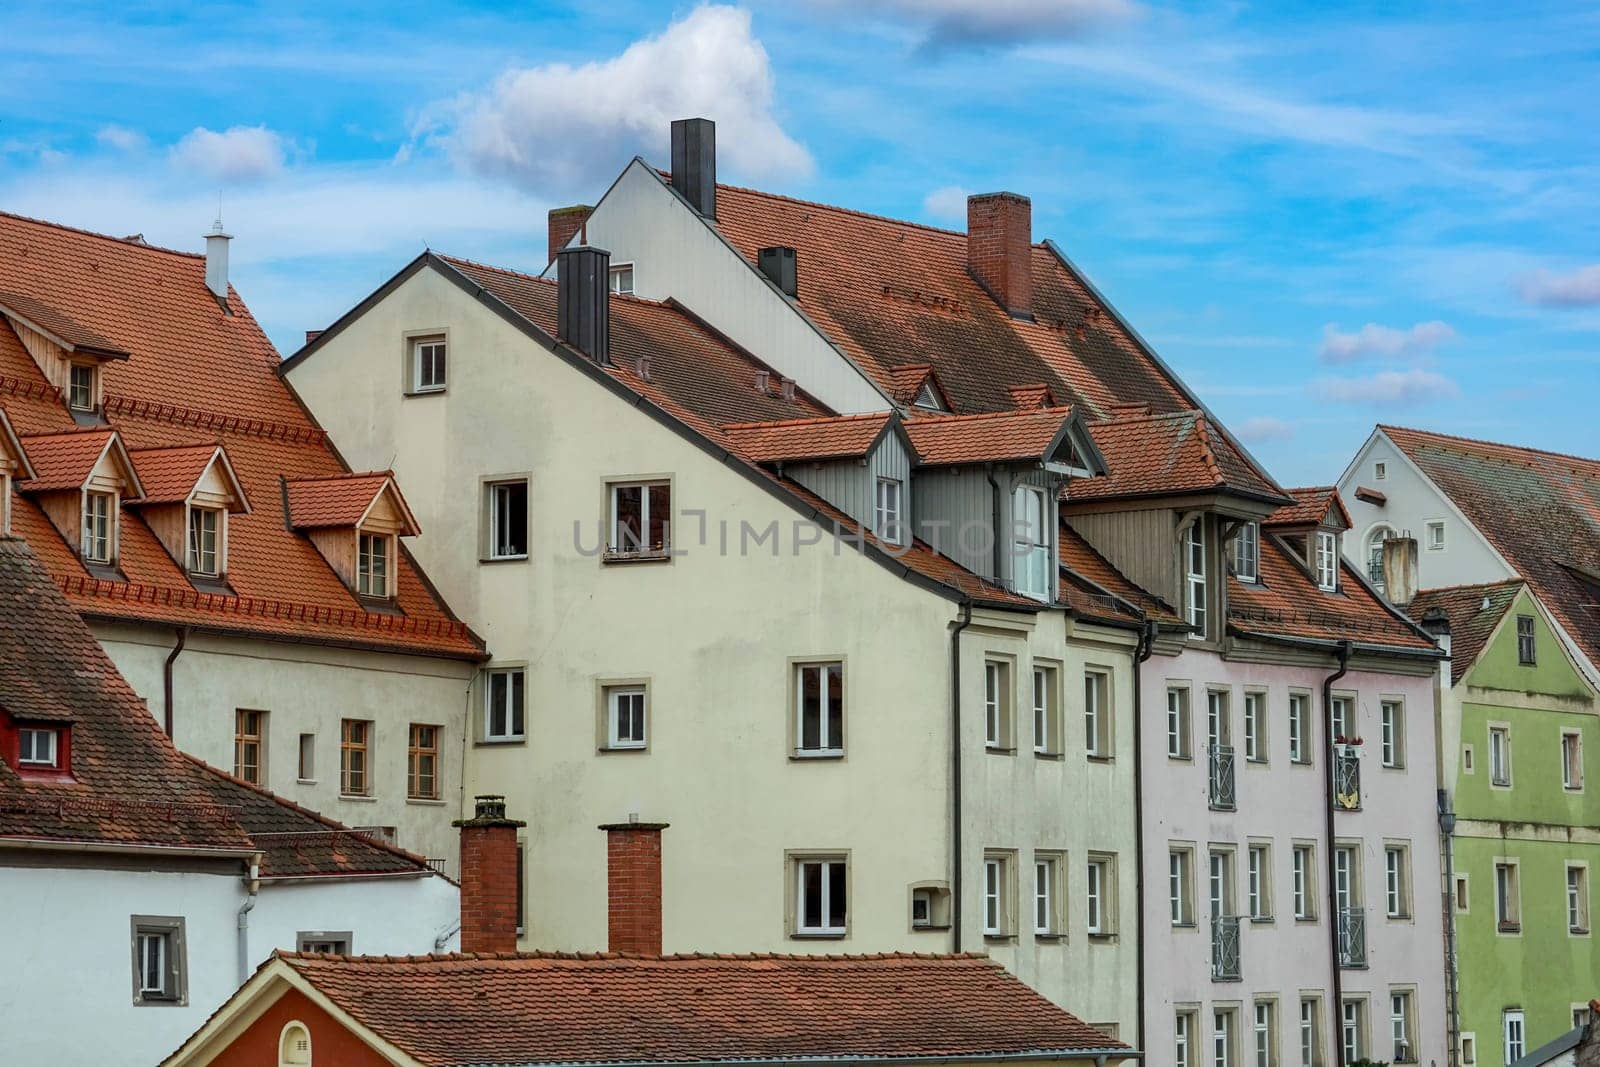 Buildings in the Old Town of Regensburg - Bavaria. UNESCO world heritage site in Germany.